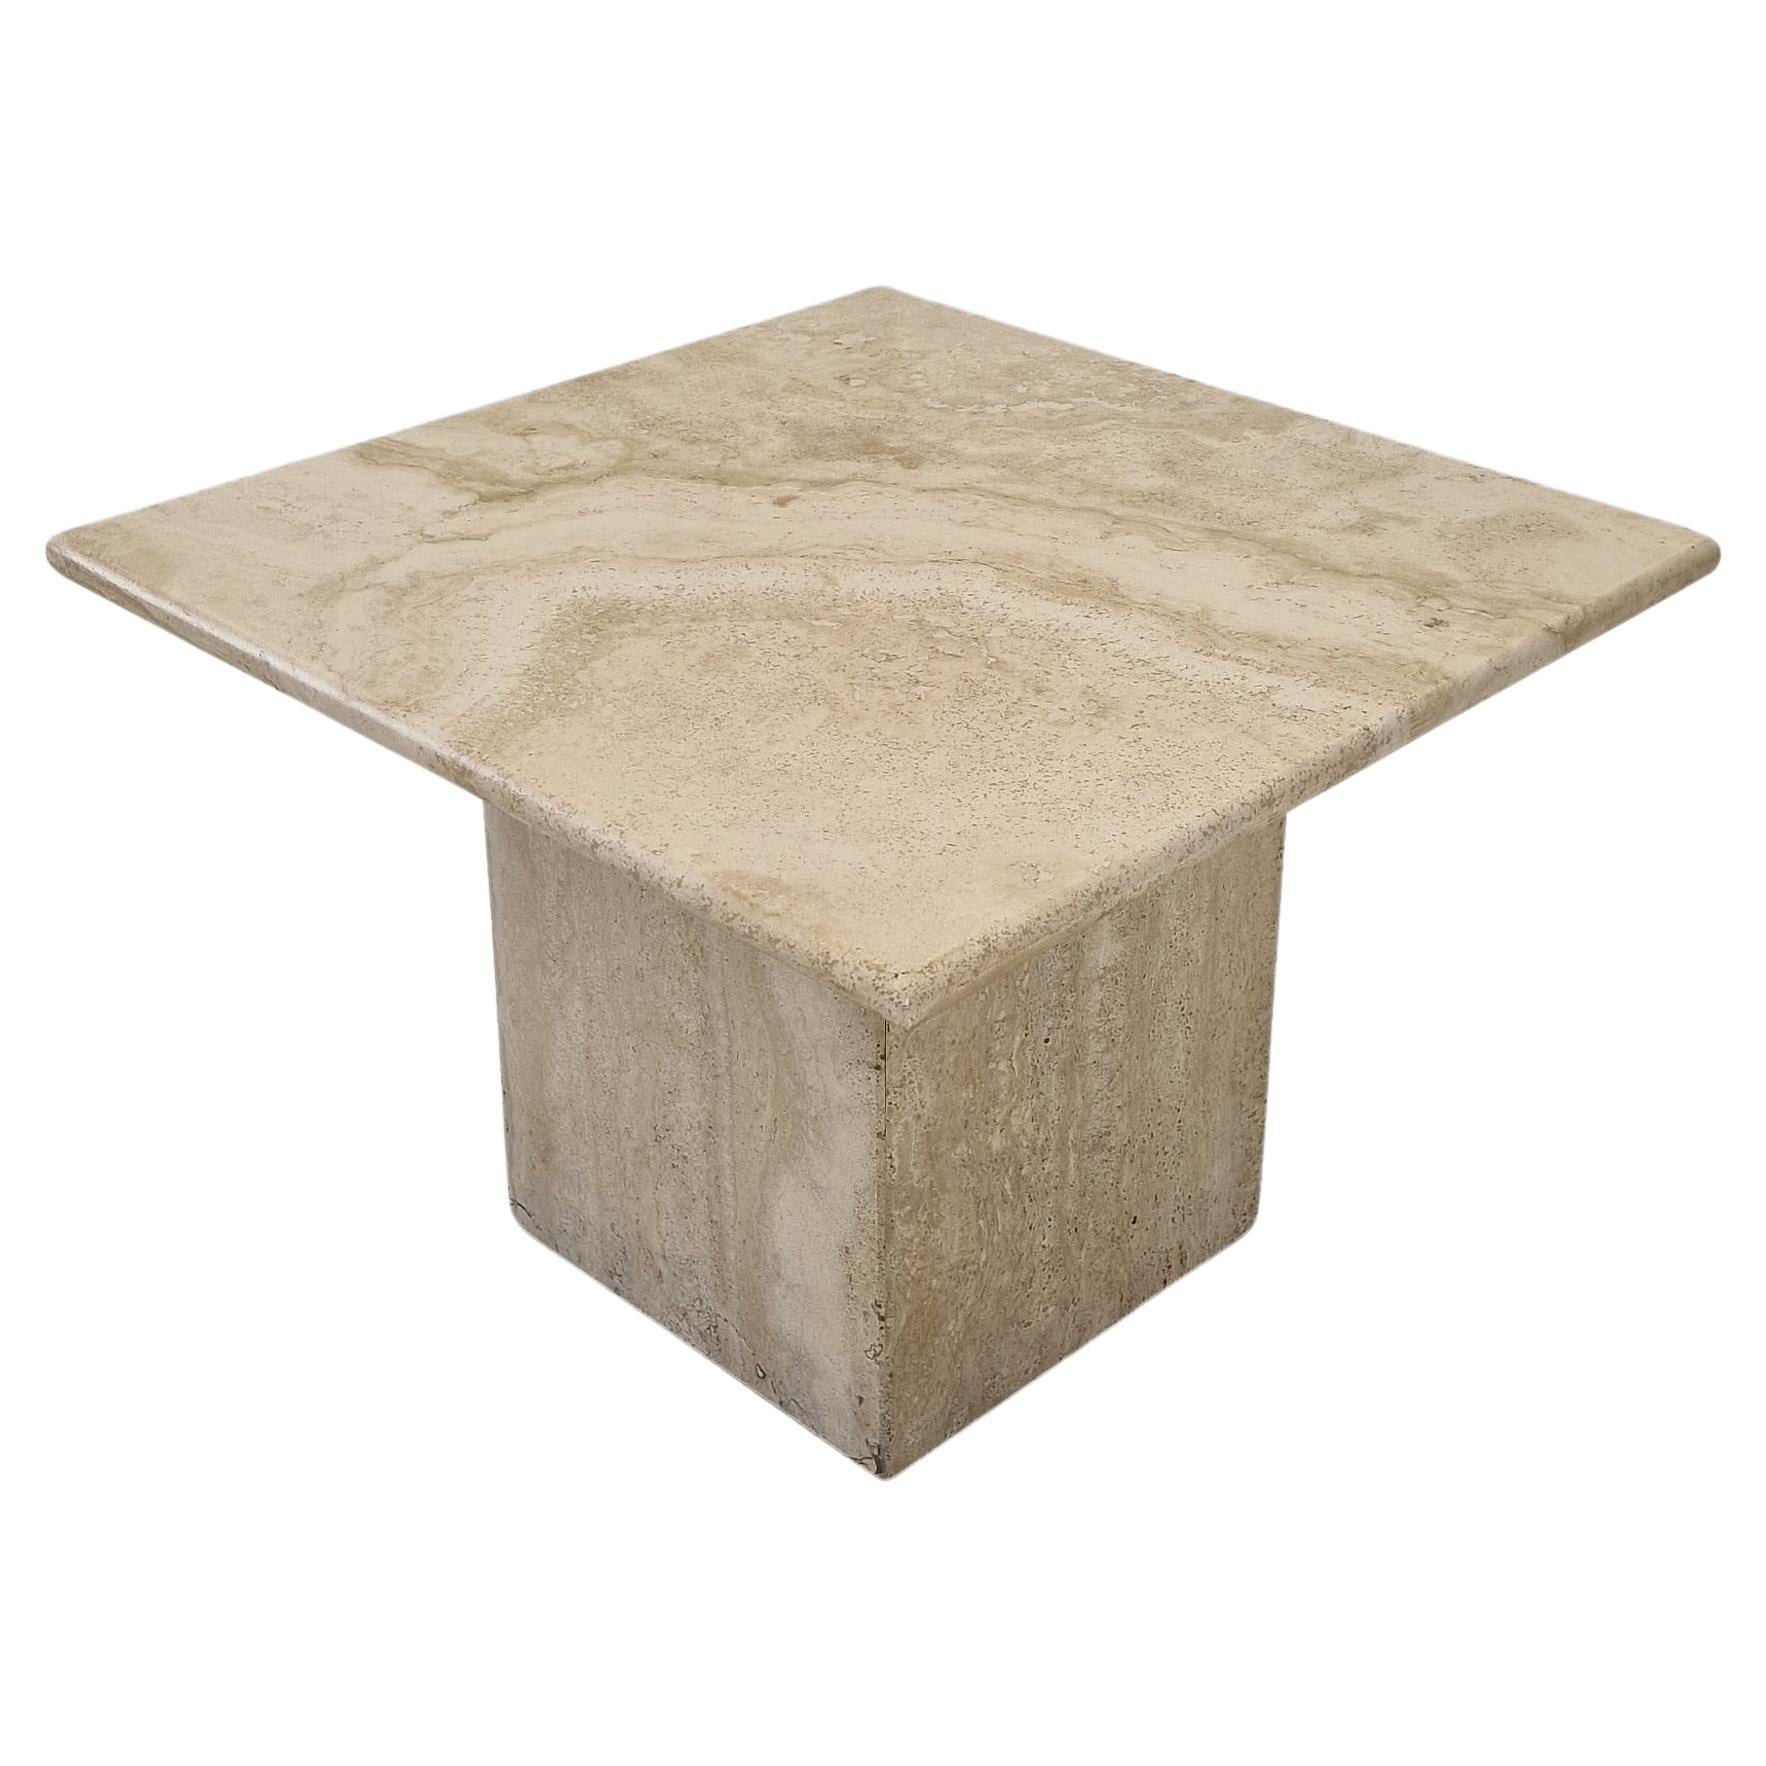 Italian Coffee or Side Table in Travertine, 1980s For Sale